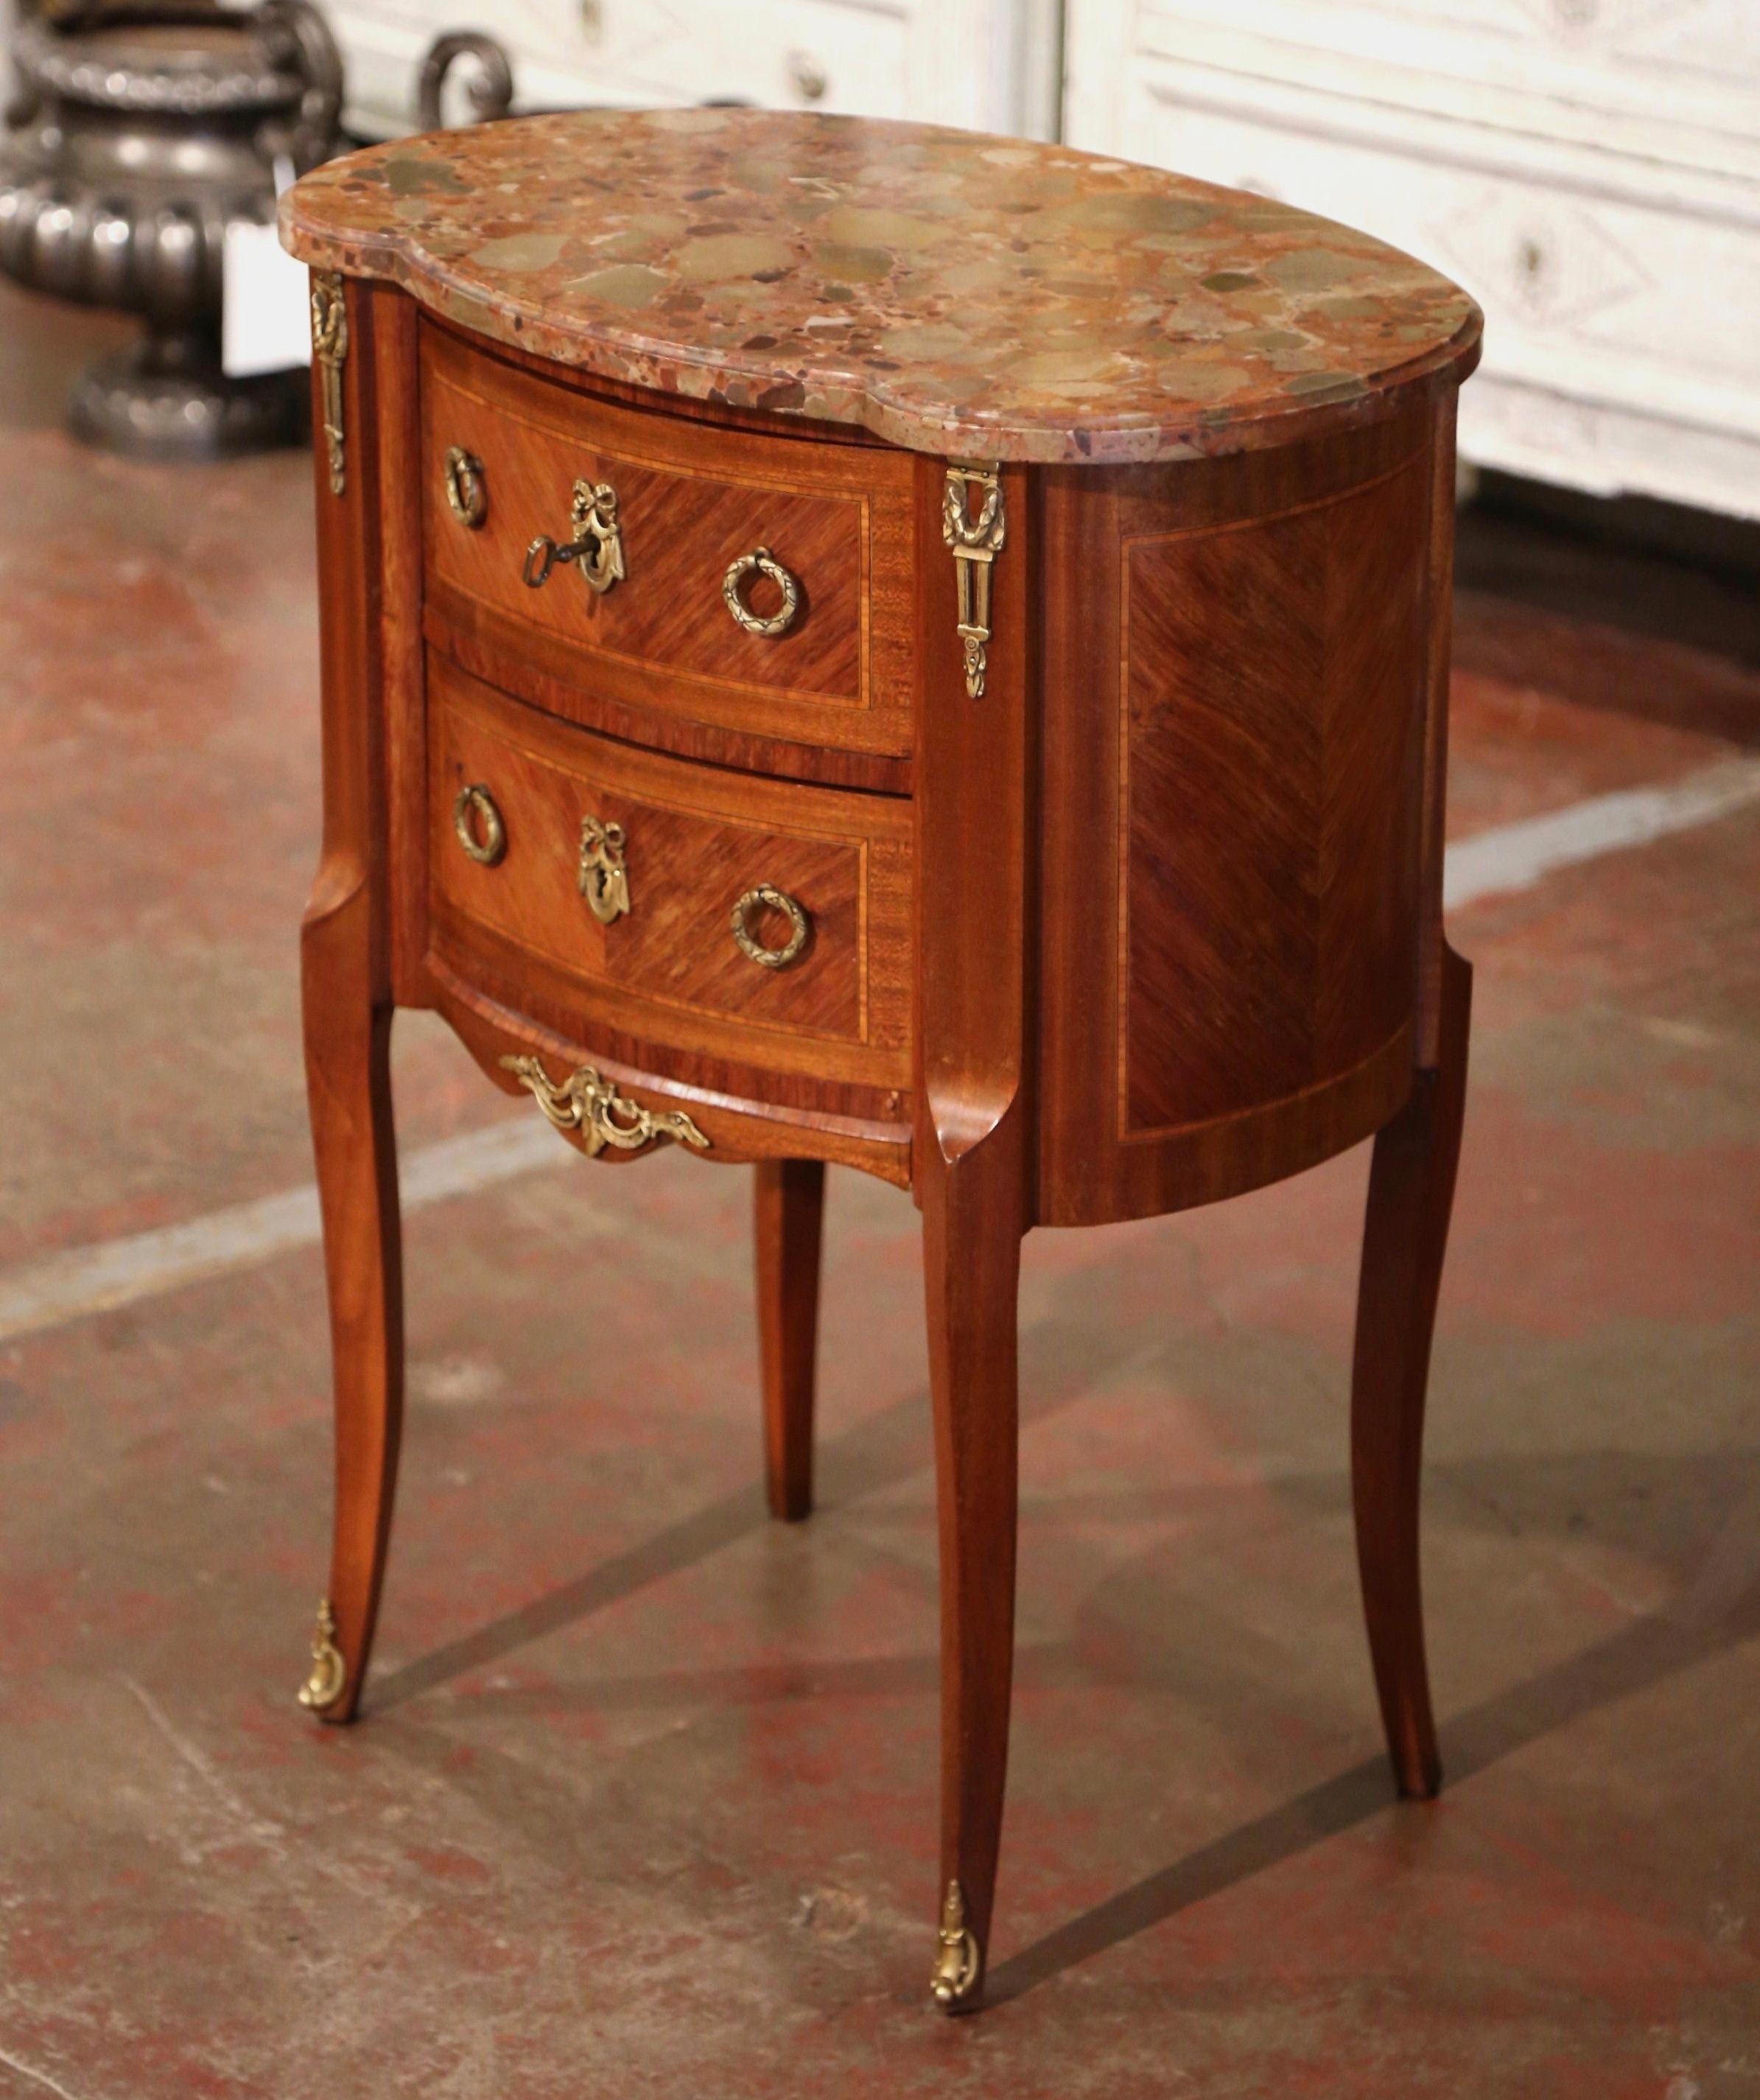 This elegant, kidney-shaped fruitwood antique commode was crafted in France, circa 1950. The commode sits on cabriole legs ending with bronze sabot mounts over a scalloped apron decorated with a bronze mount. The bow front features two drawers